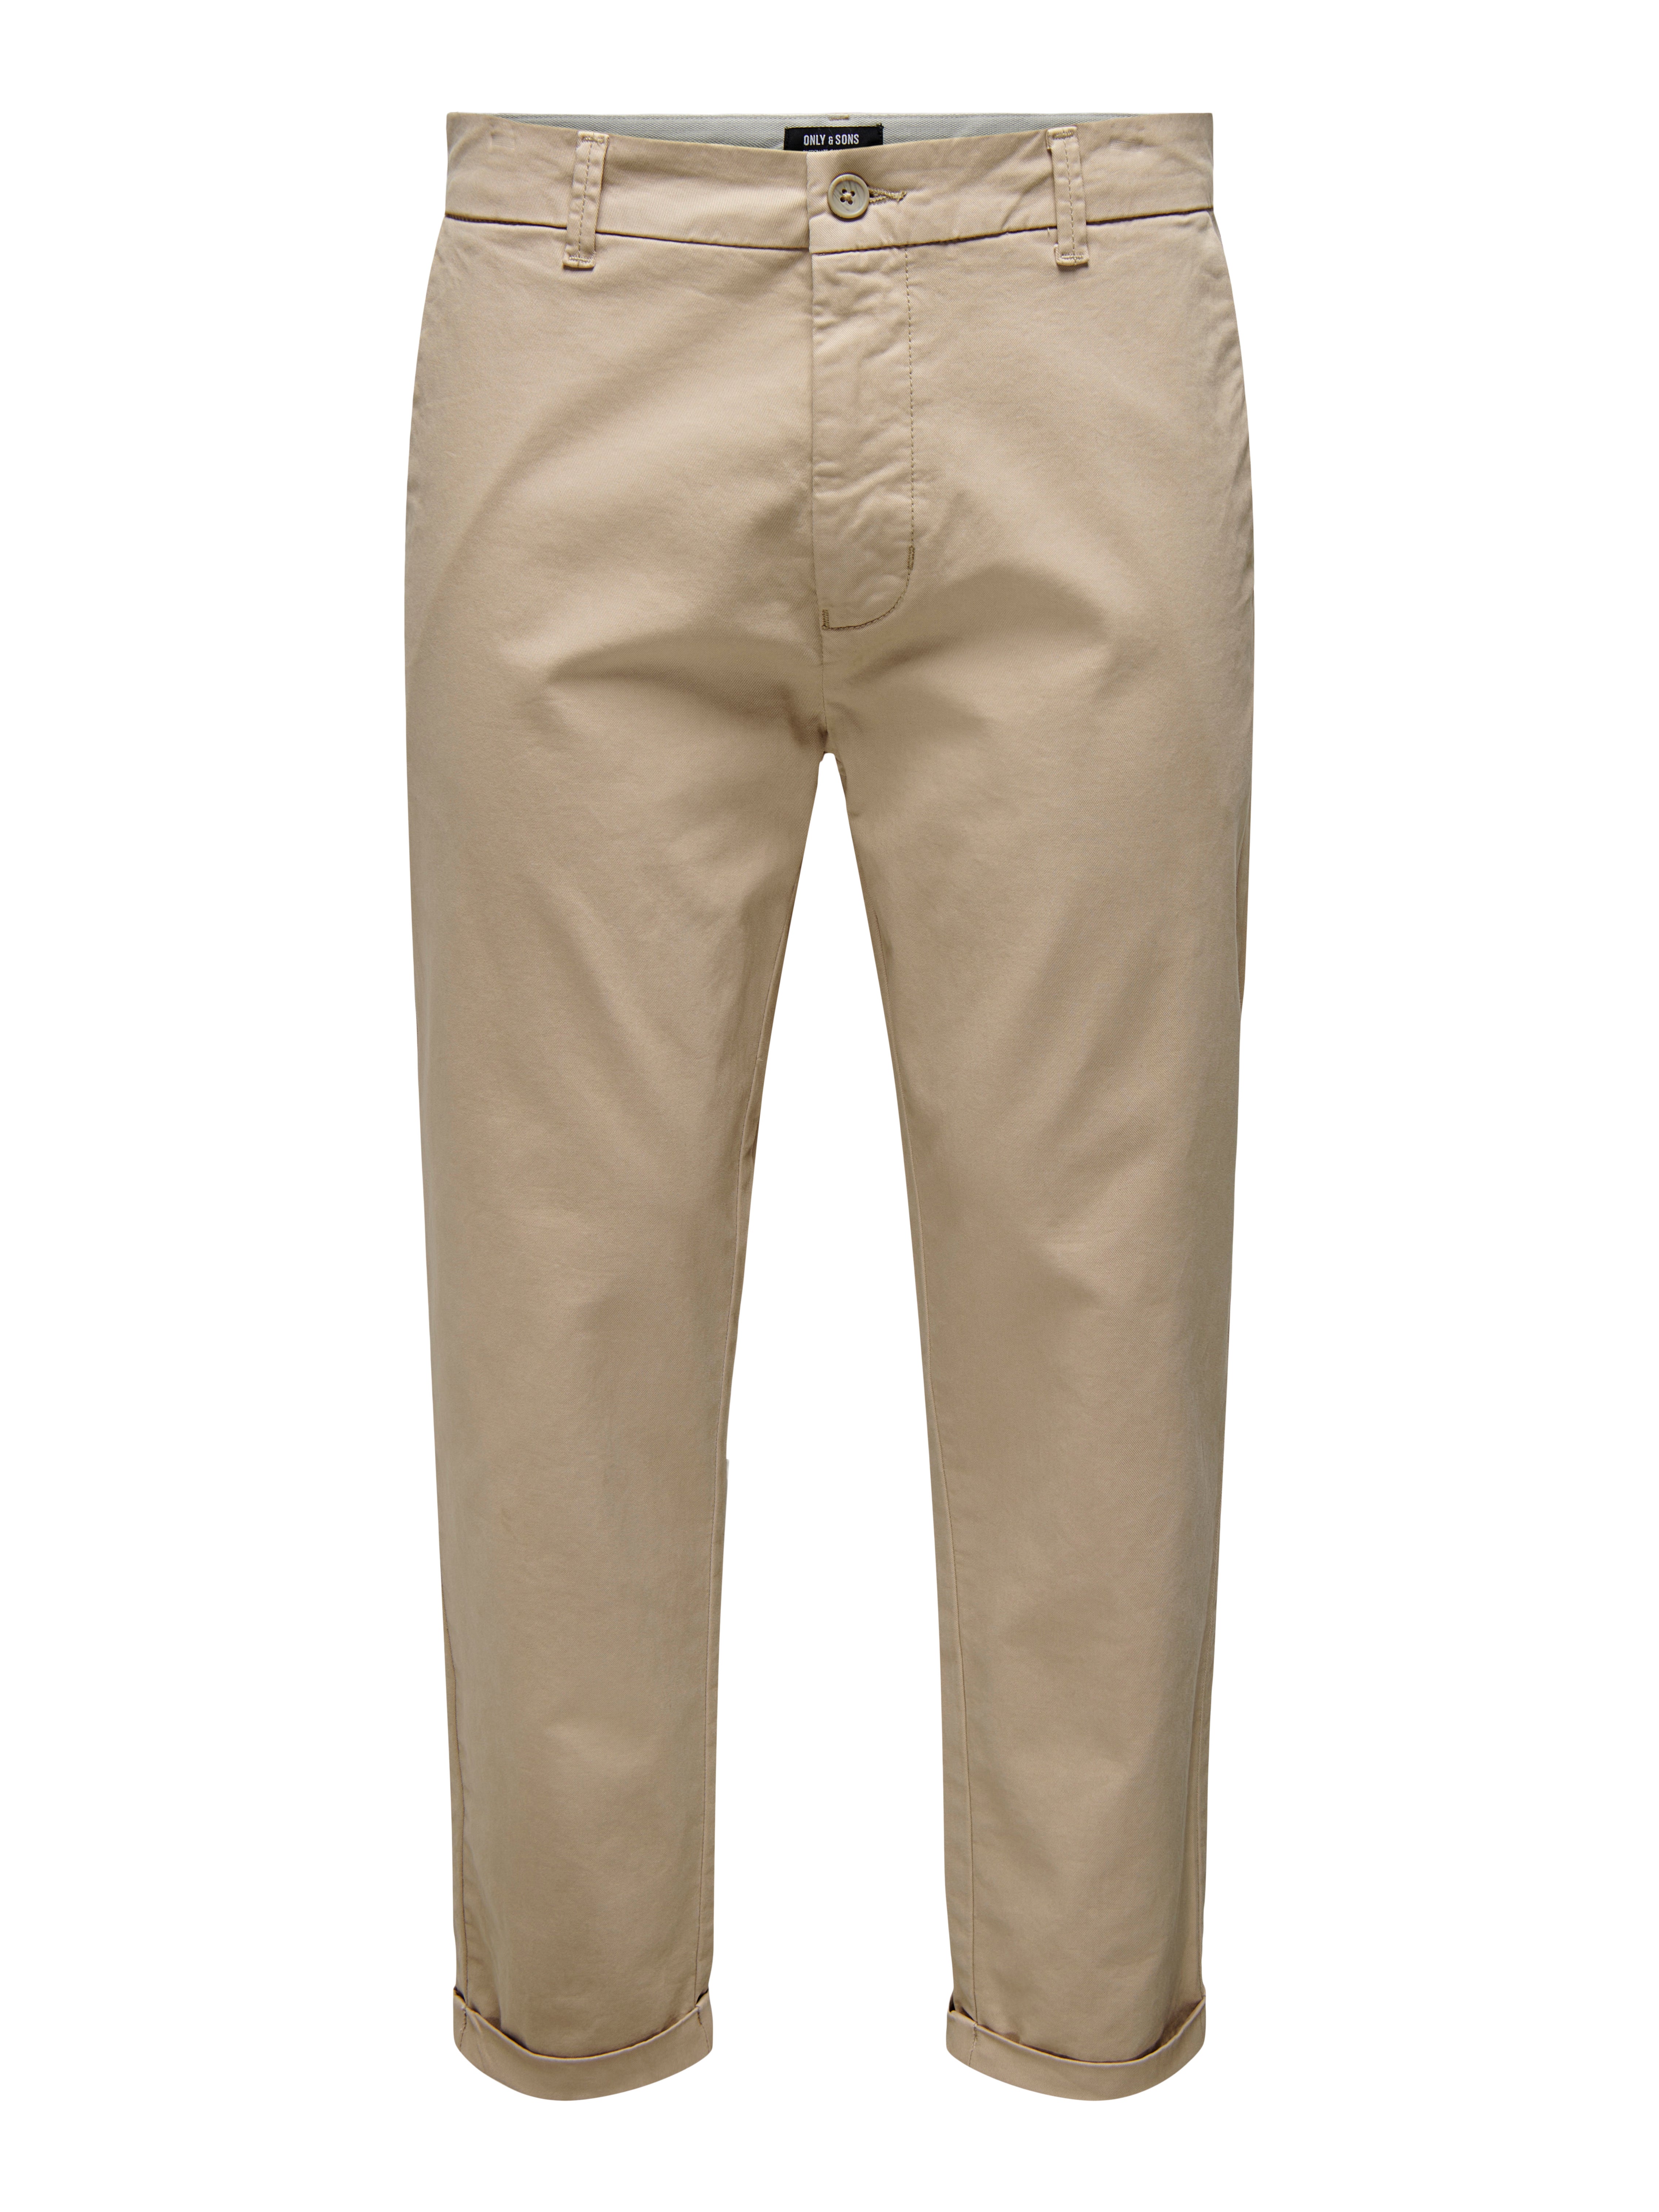 ONSKENT CROPPED CHINO MA 0400 con 30% de descuento | ONLY & SONS®